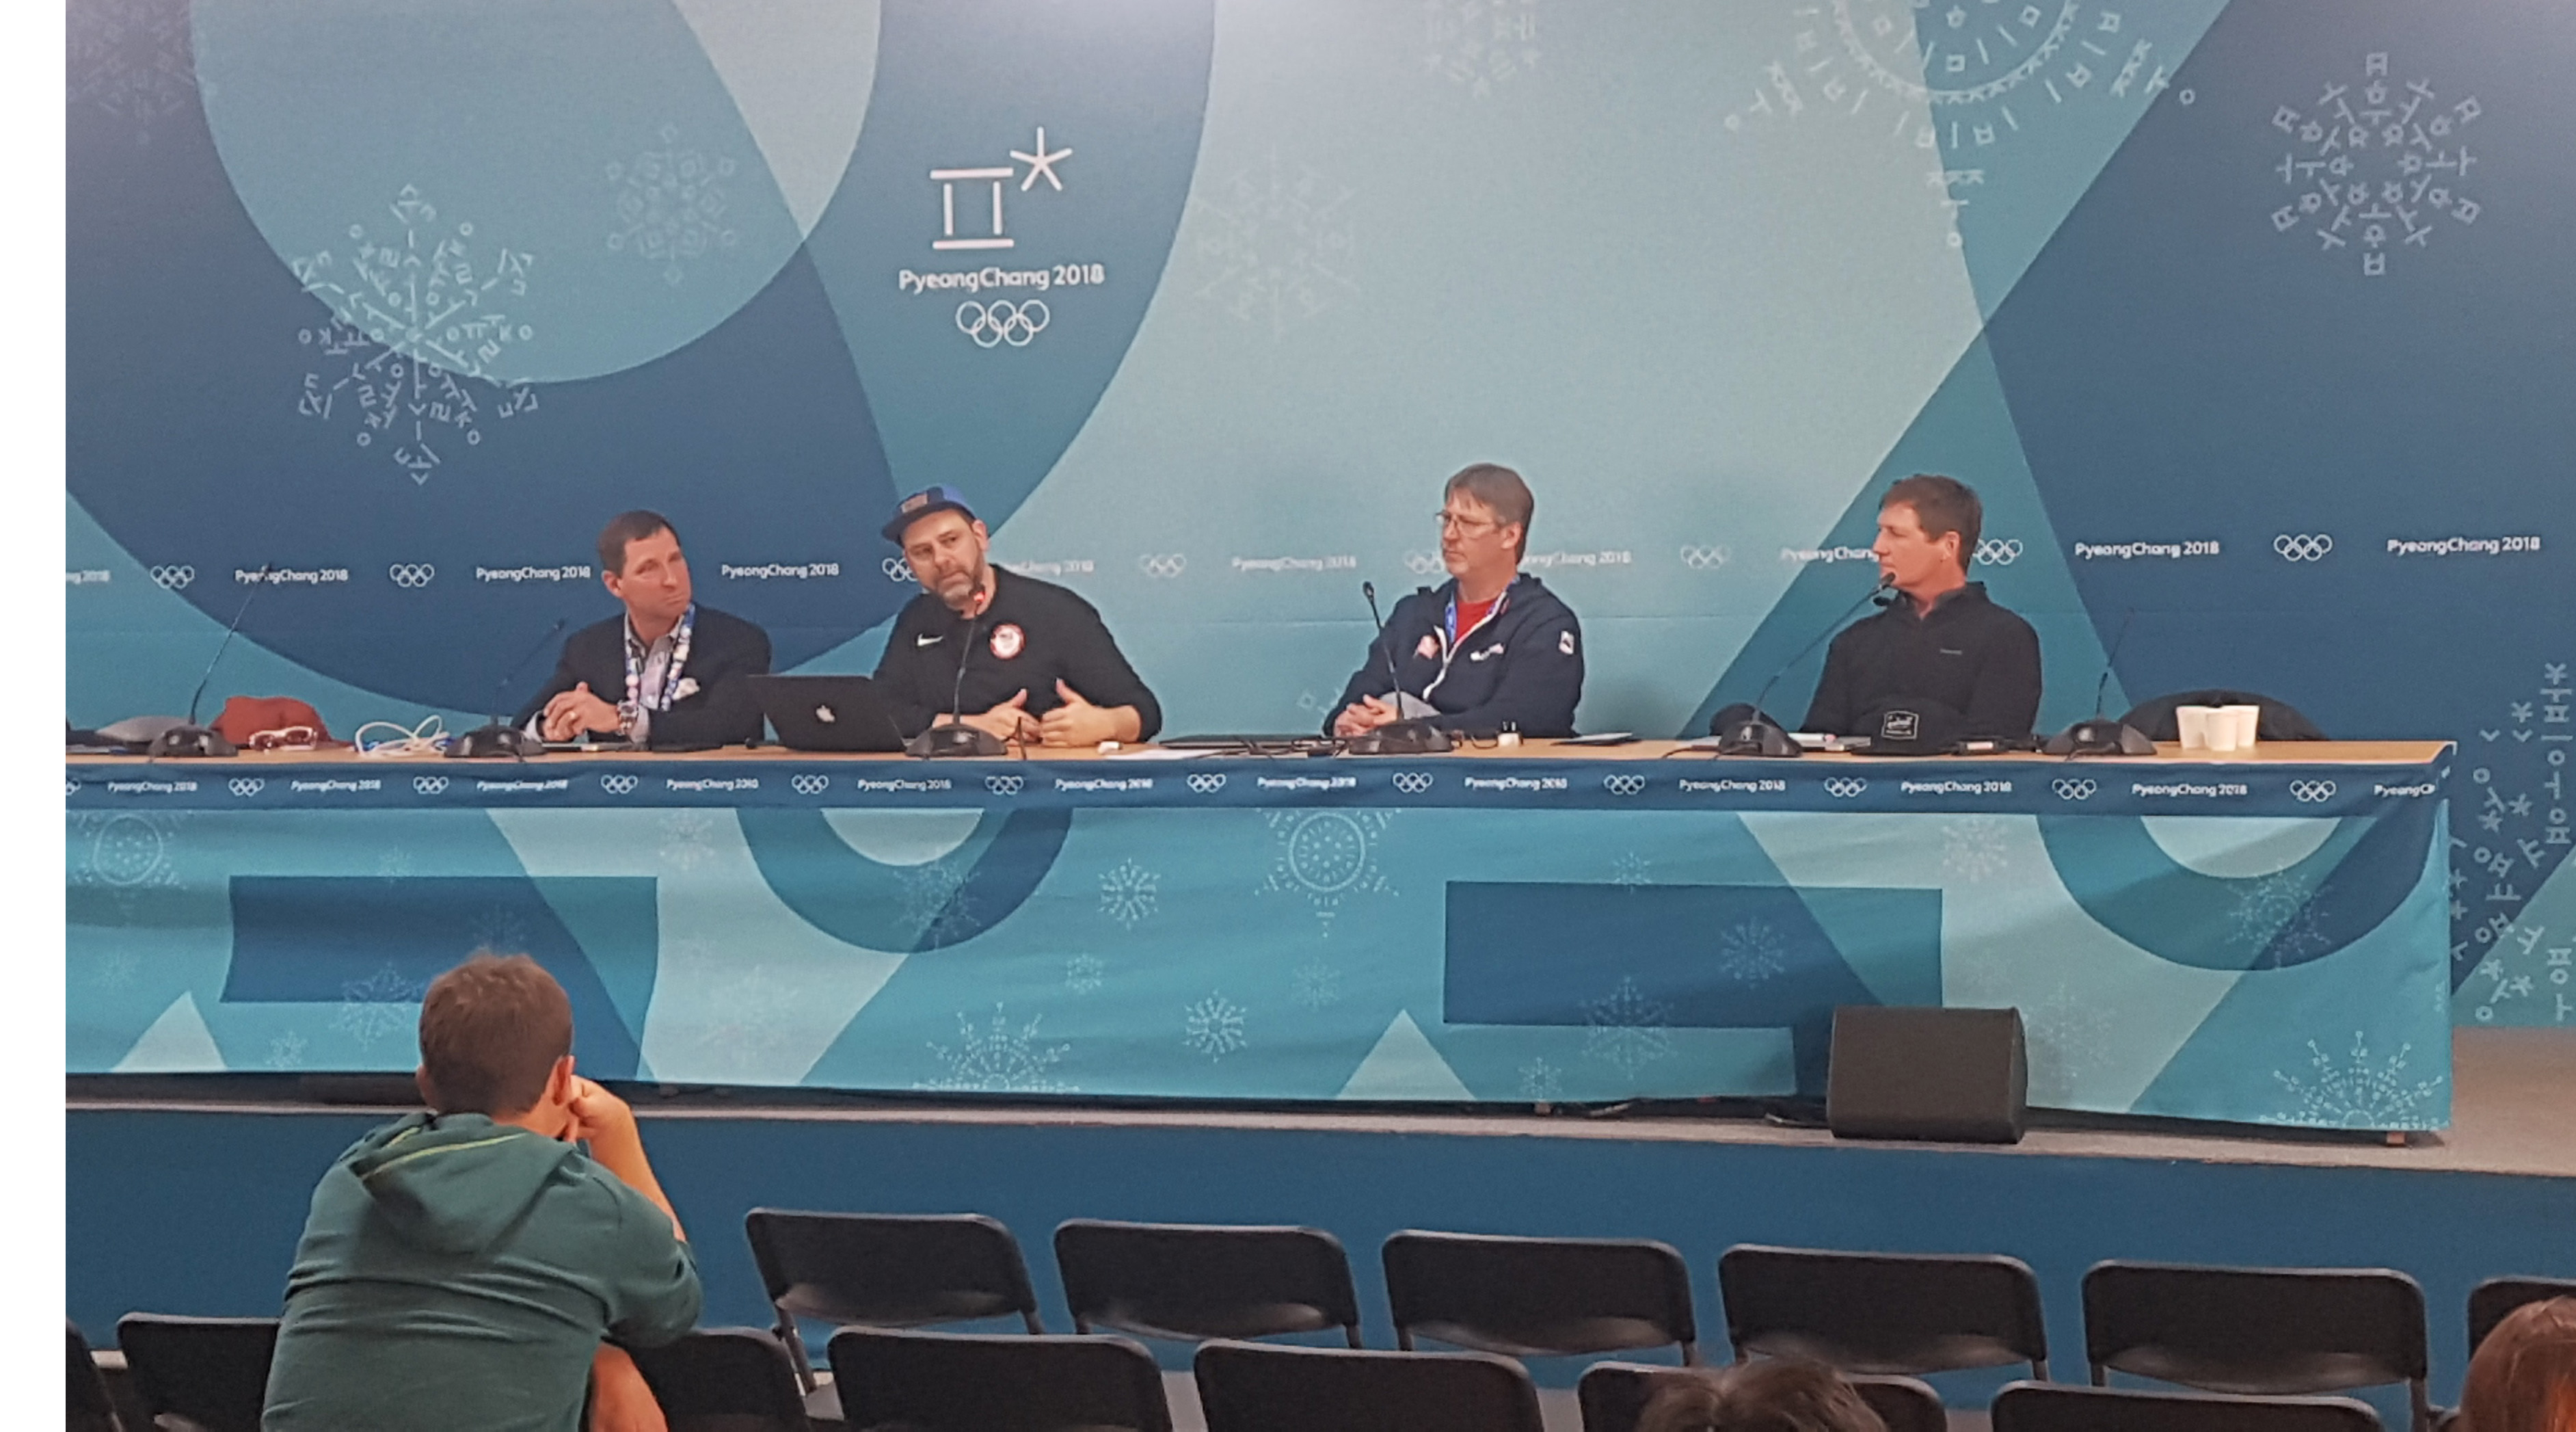 Dave Goltz, M.D.; Jeff Kutcher, M.D.; Wilkens; and Tom Hackett, M.D at the IOC panel discussion at the PyeongChang Olympics